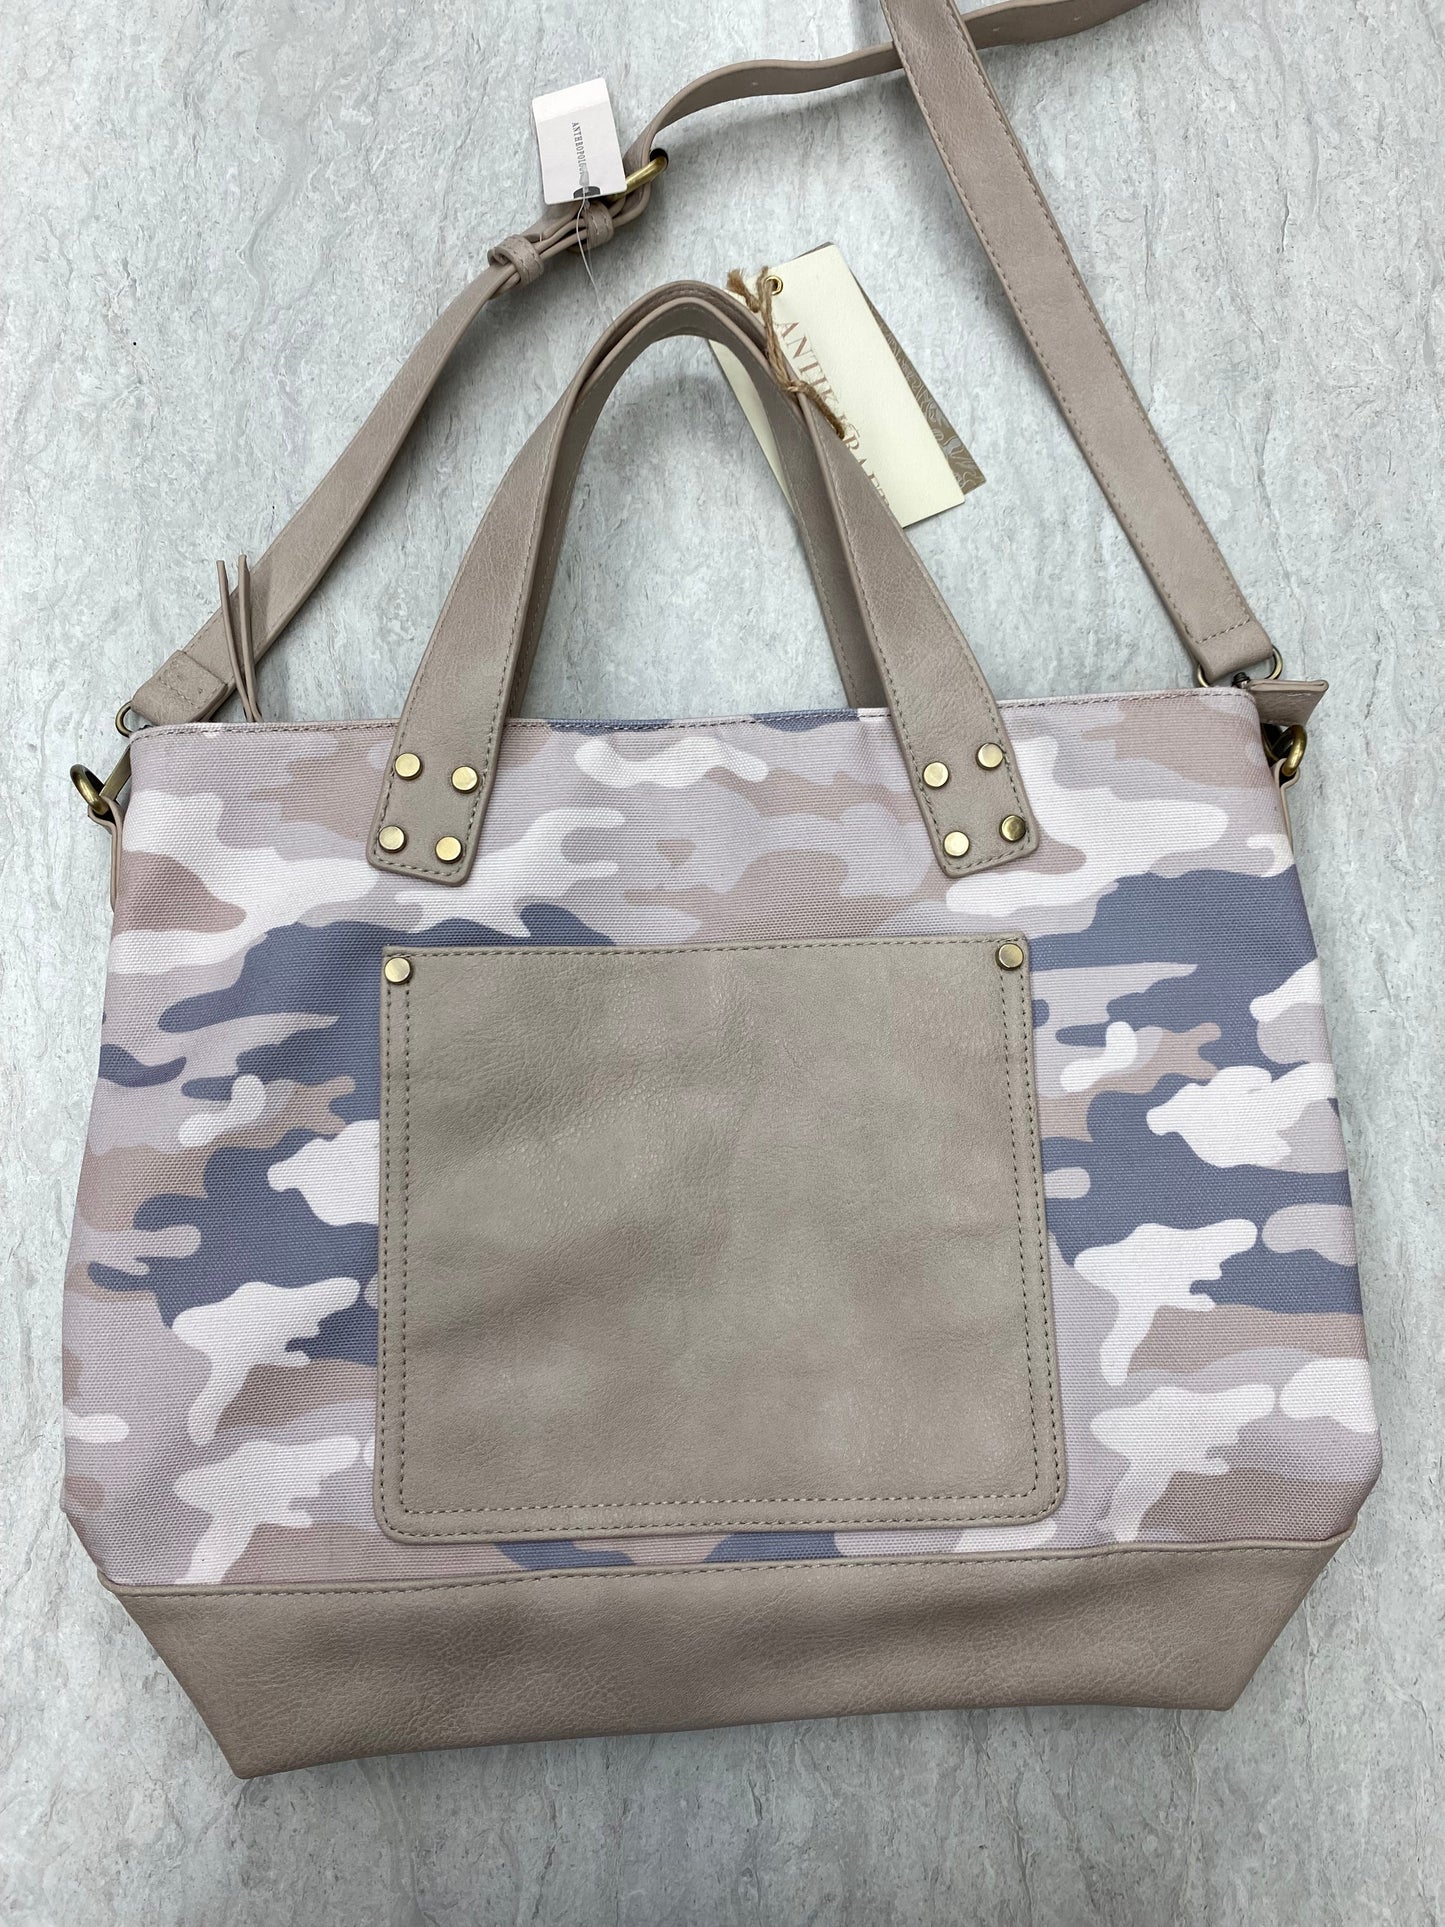 Tote By Anthropologie  Size: Medium